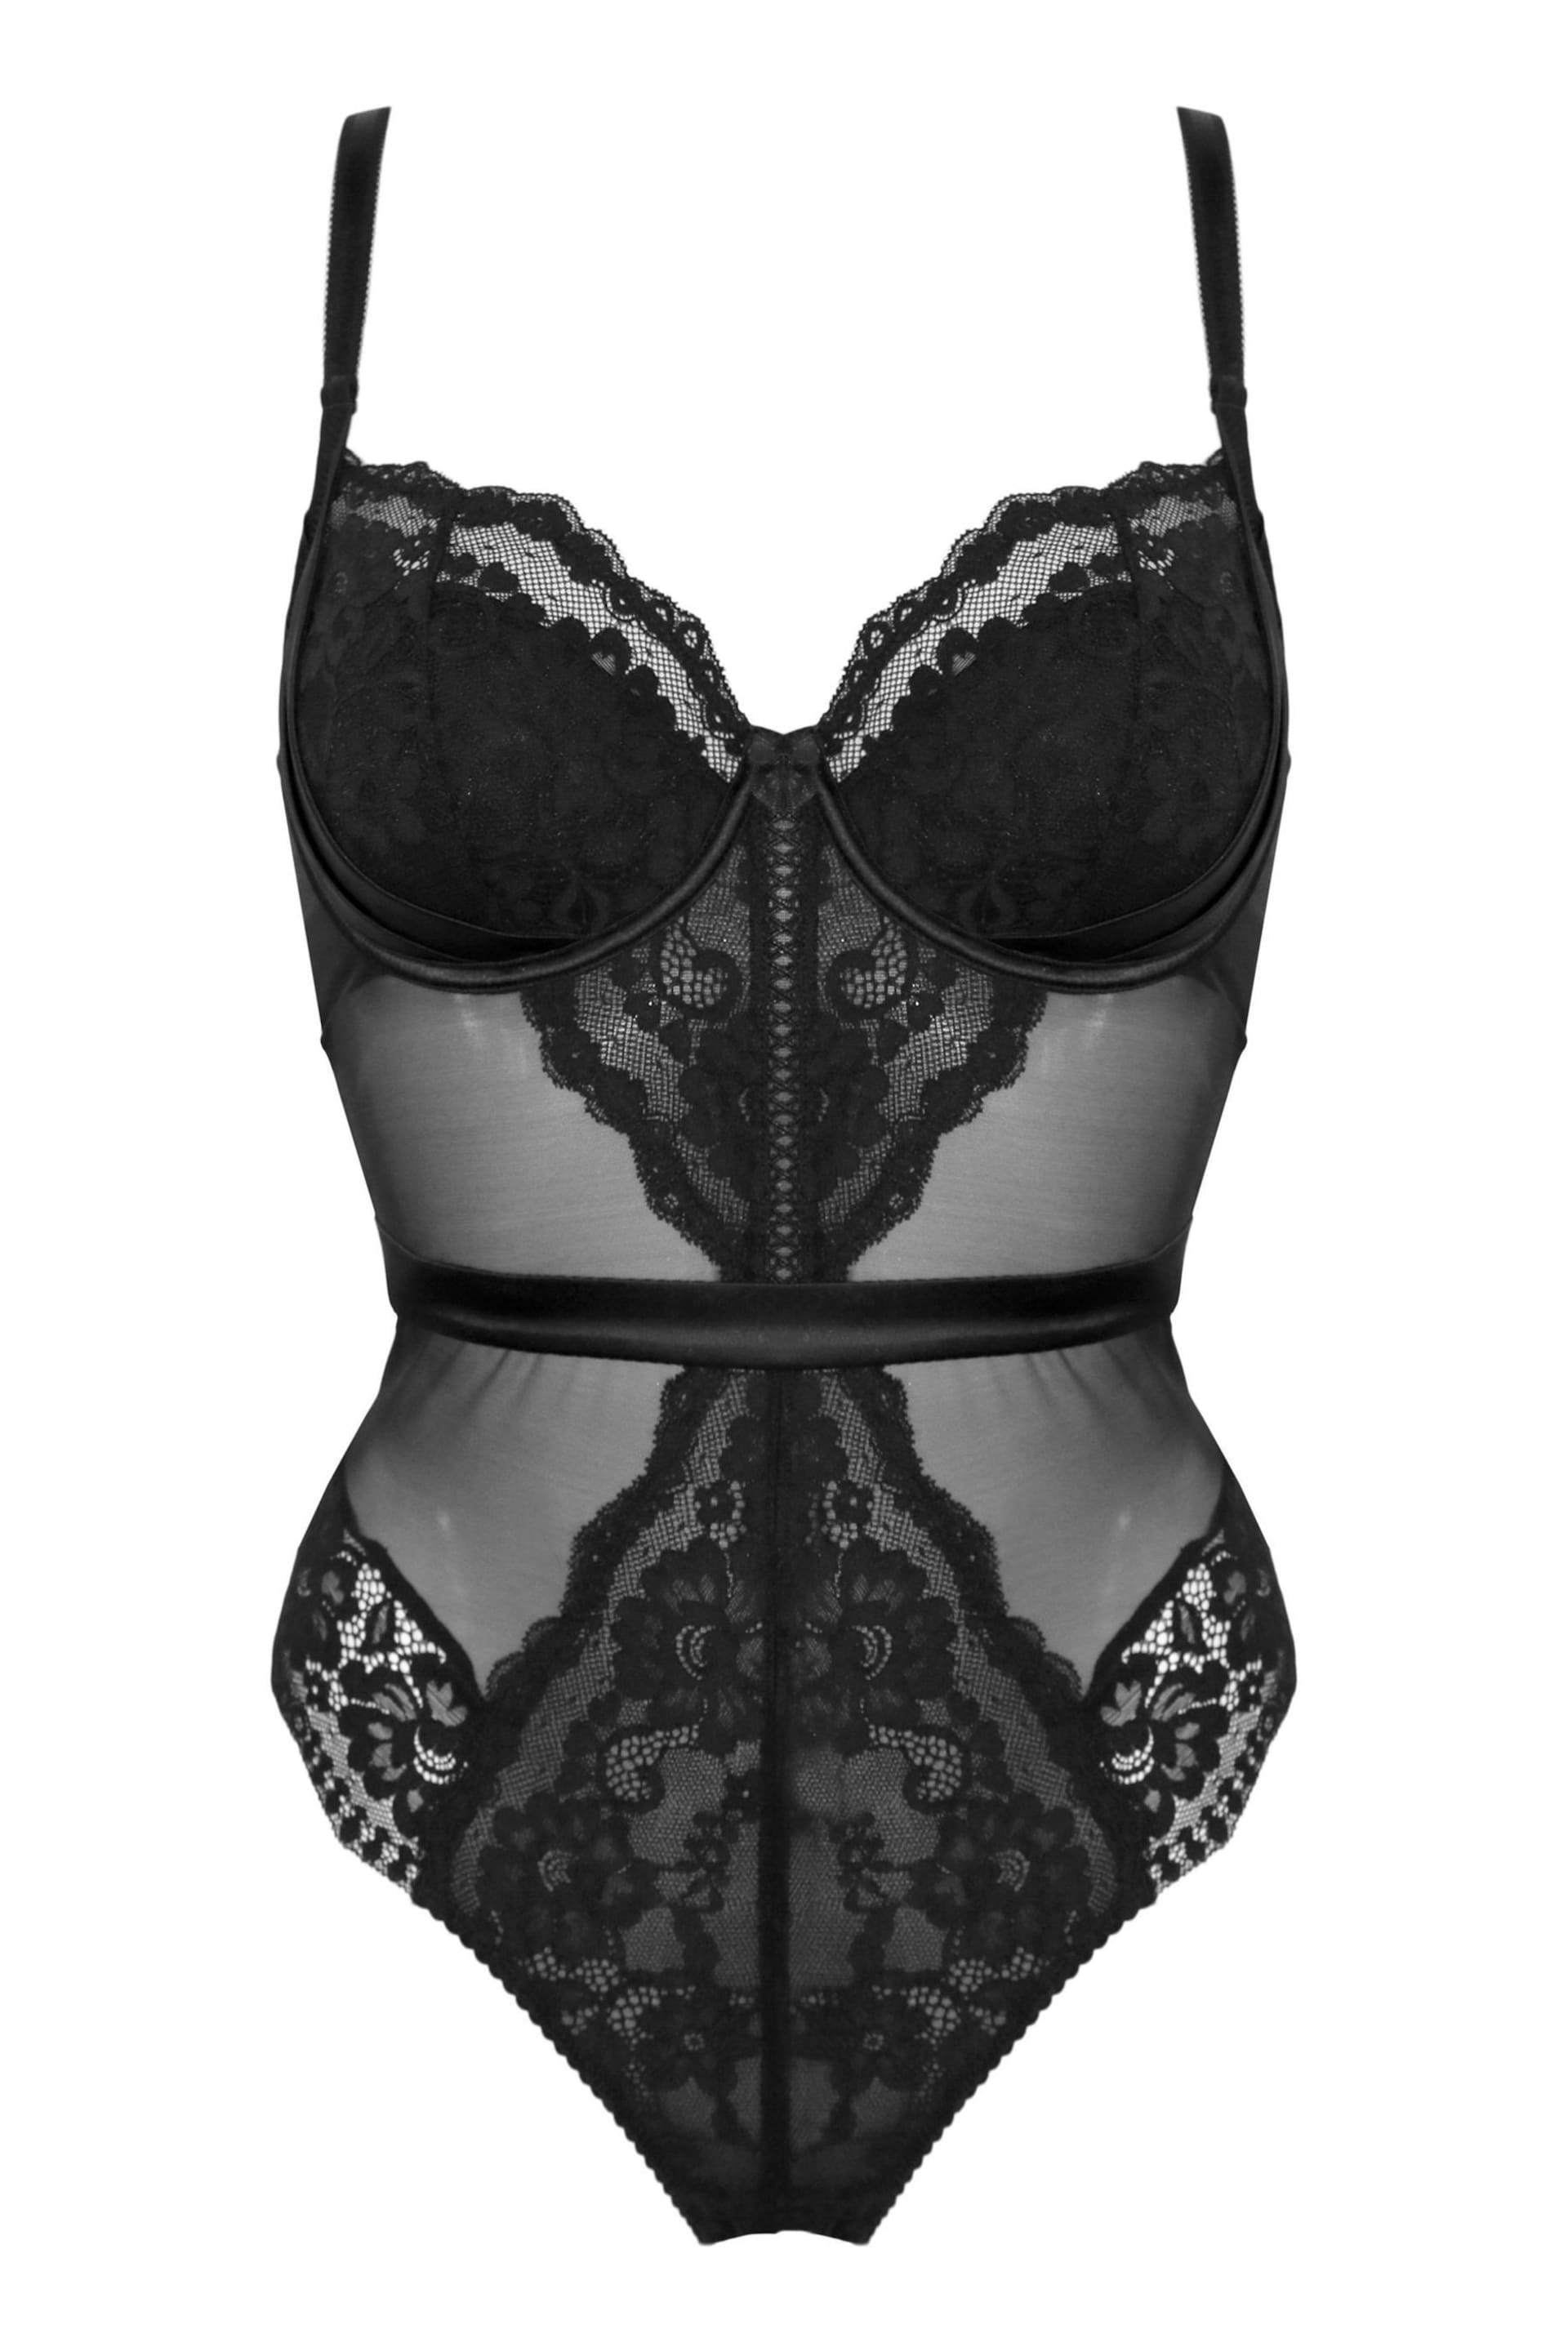 Pour Moi Black Fleur Half Padded Underwired Bra - Image 3 of 4